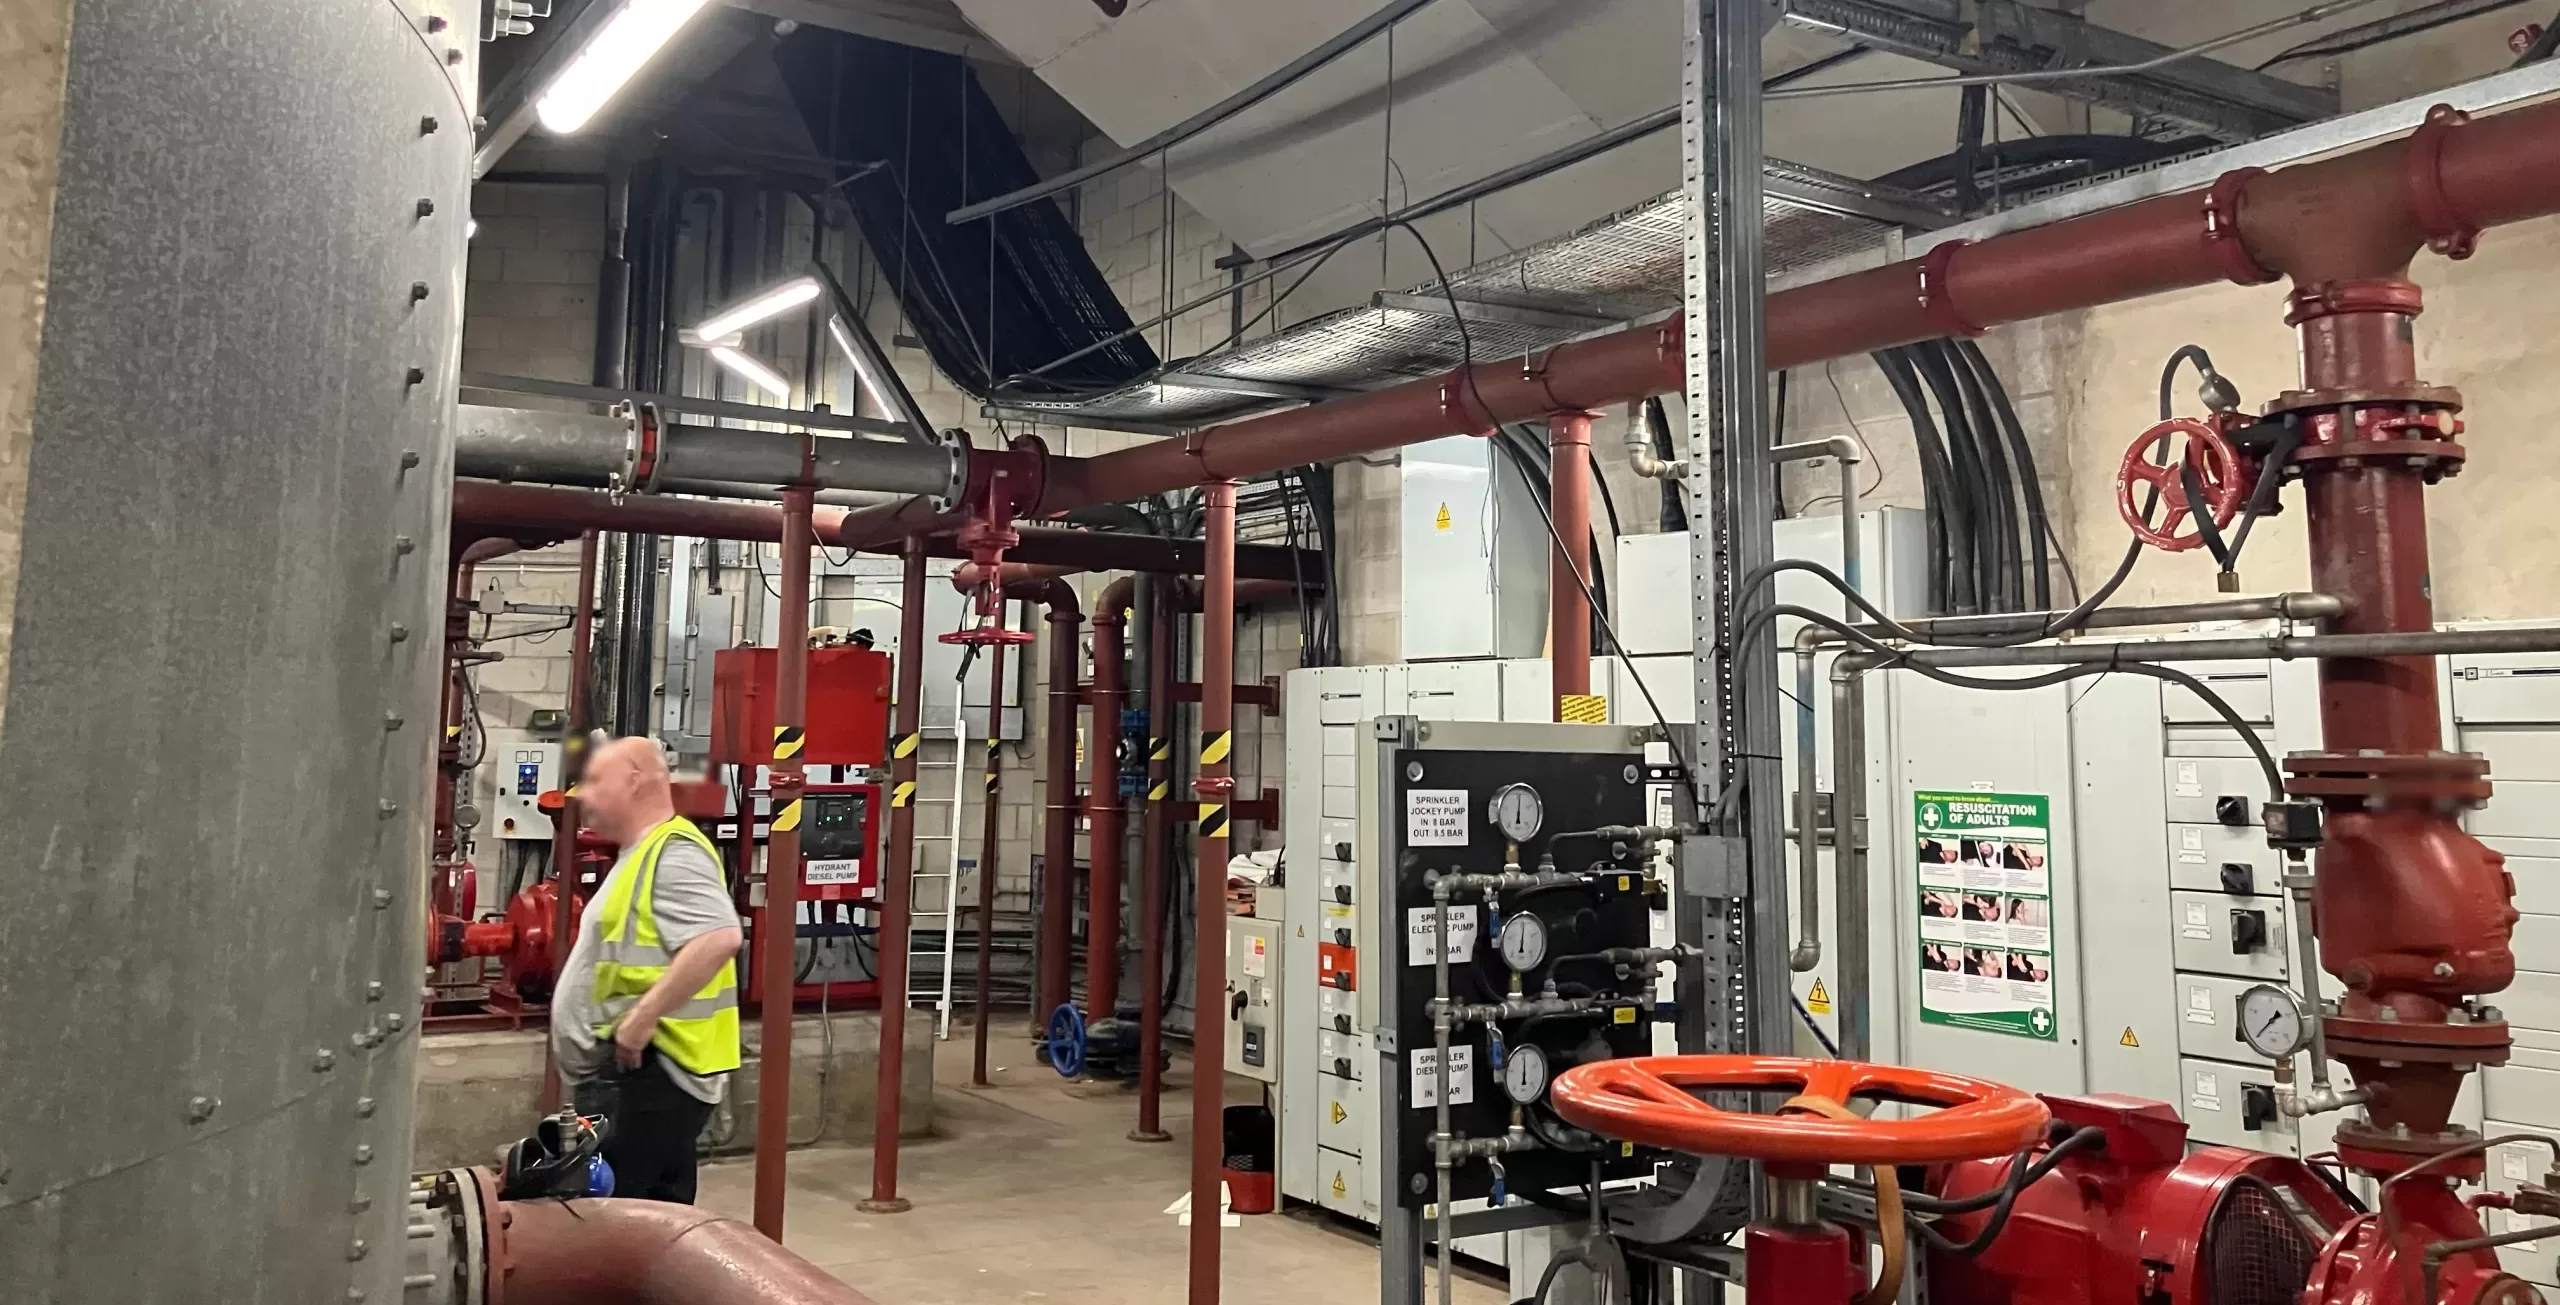 Photo of a commercial fire suppression (sprinkler) plant room